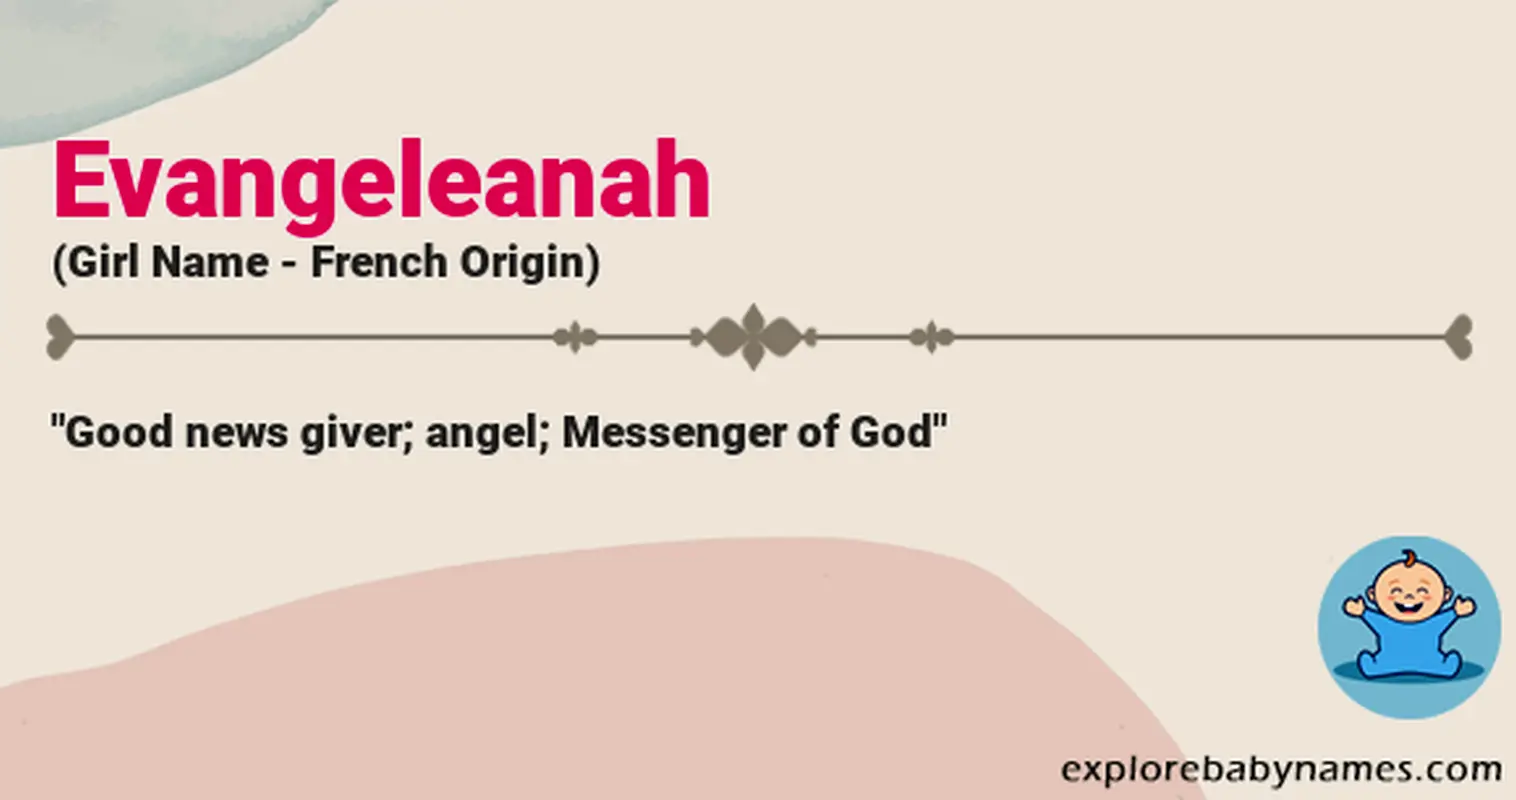 Meaning of Evangeleanah